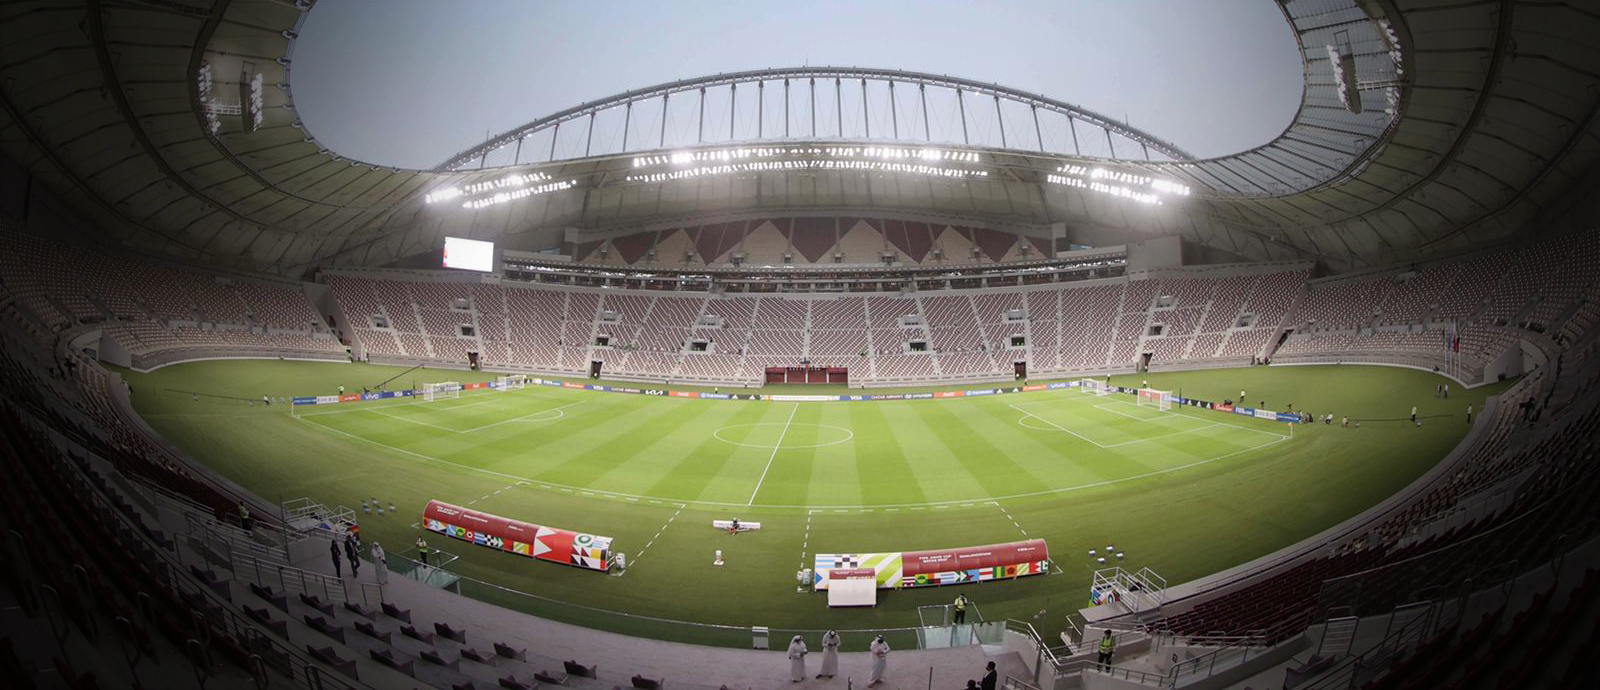  High praise for the success of the “Arab Cup 2021” qualifiers in Doha